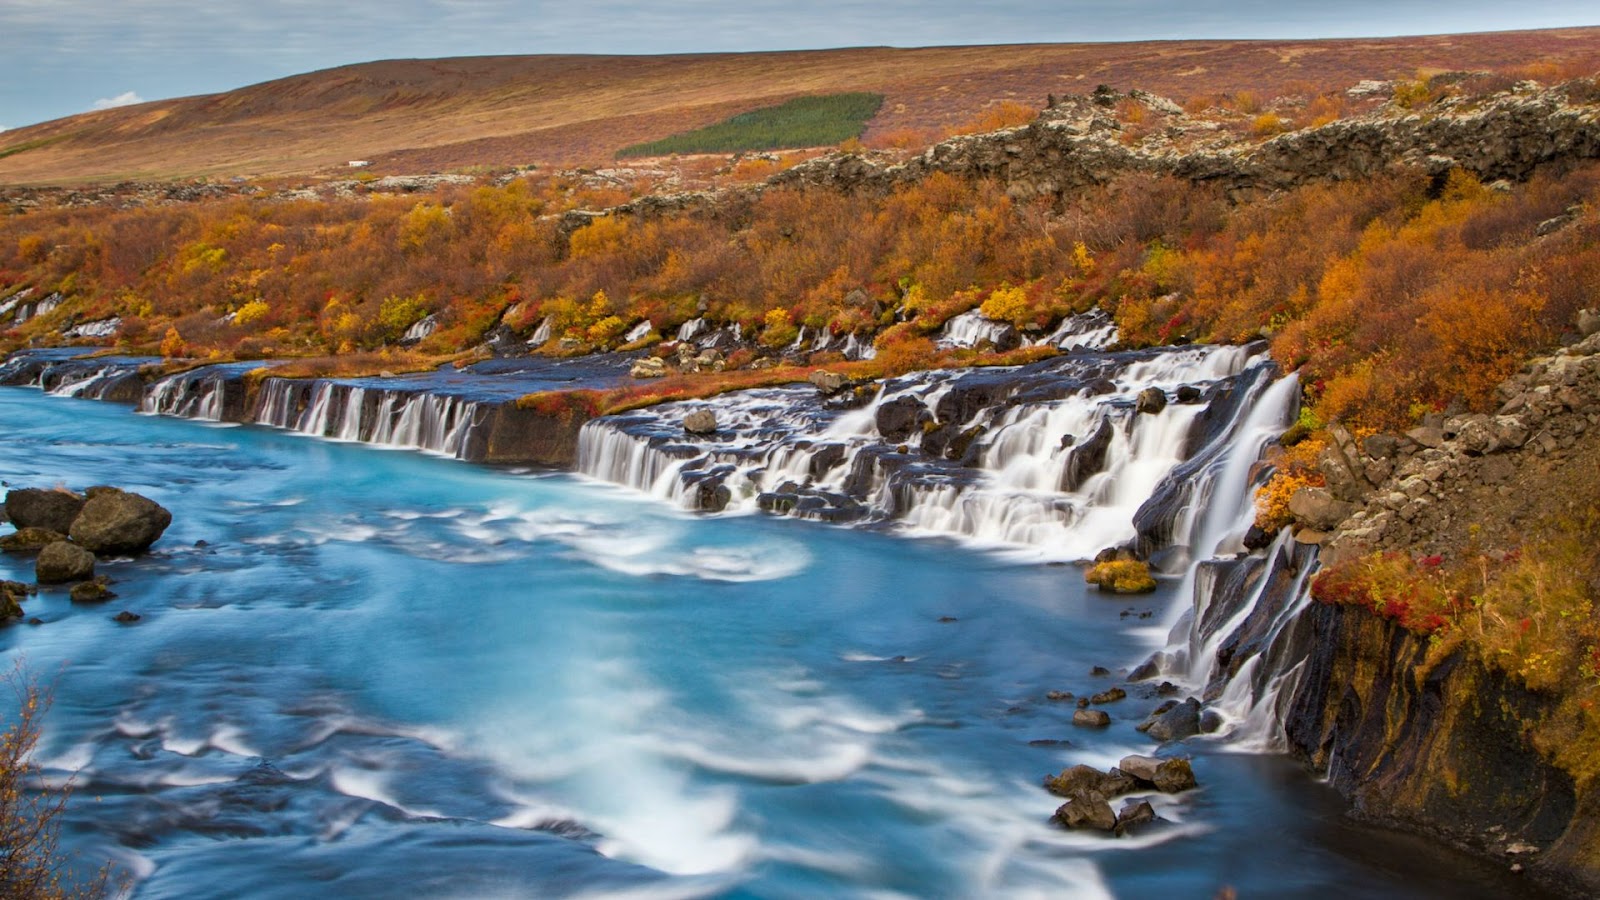 The Hraunfossar waterfall, made up of thousands of tiny streams, on a sunny day